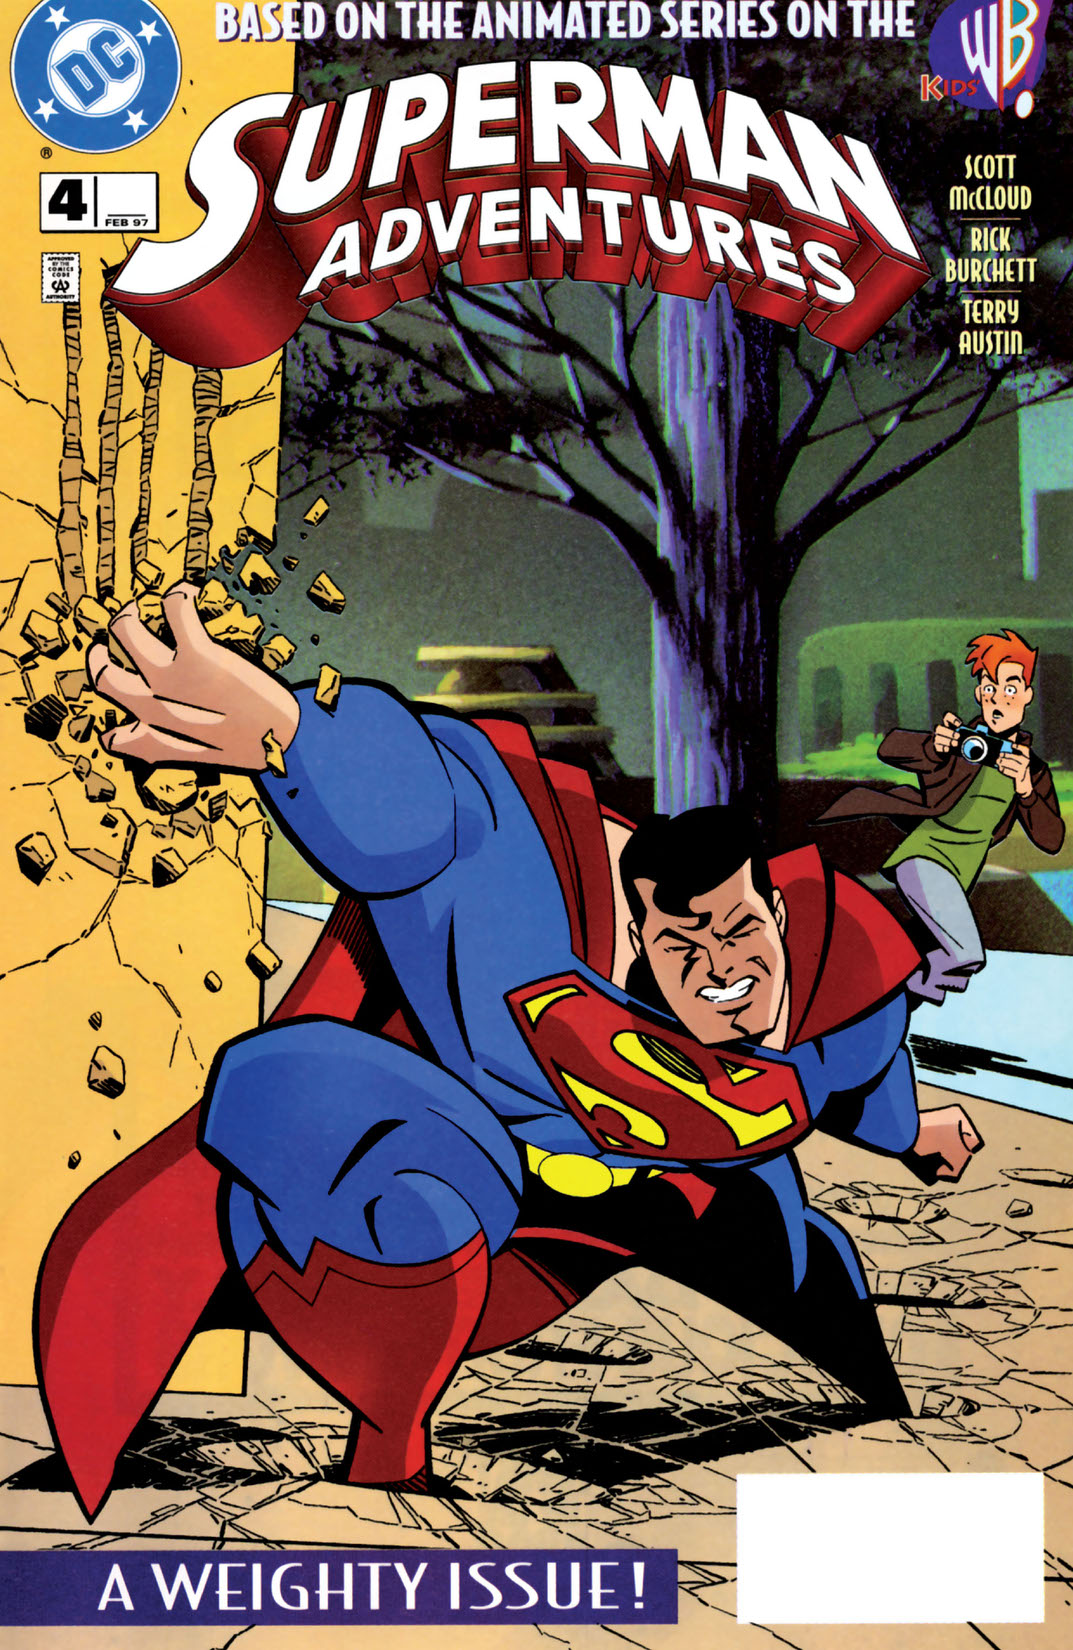 Superman Adventures #4 preview images